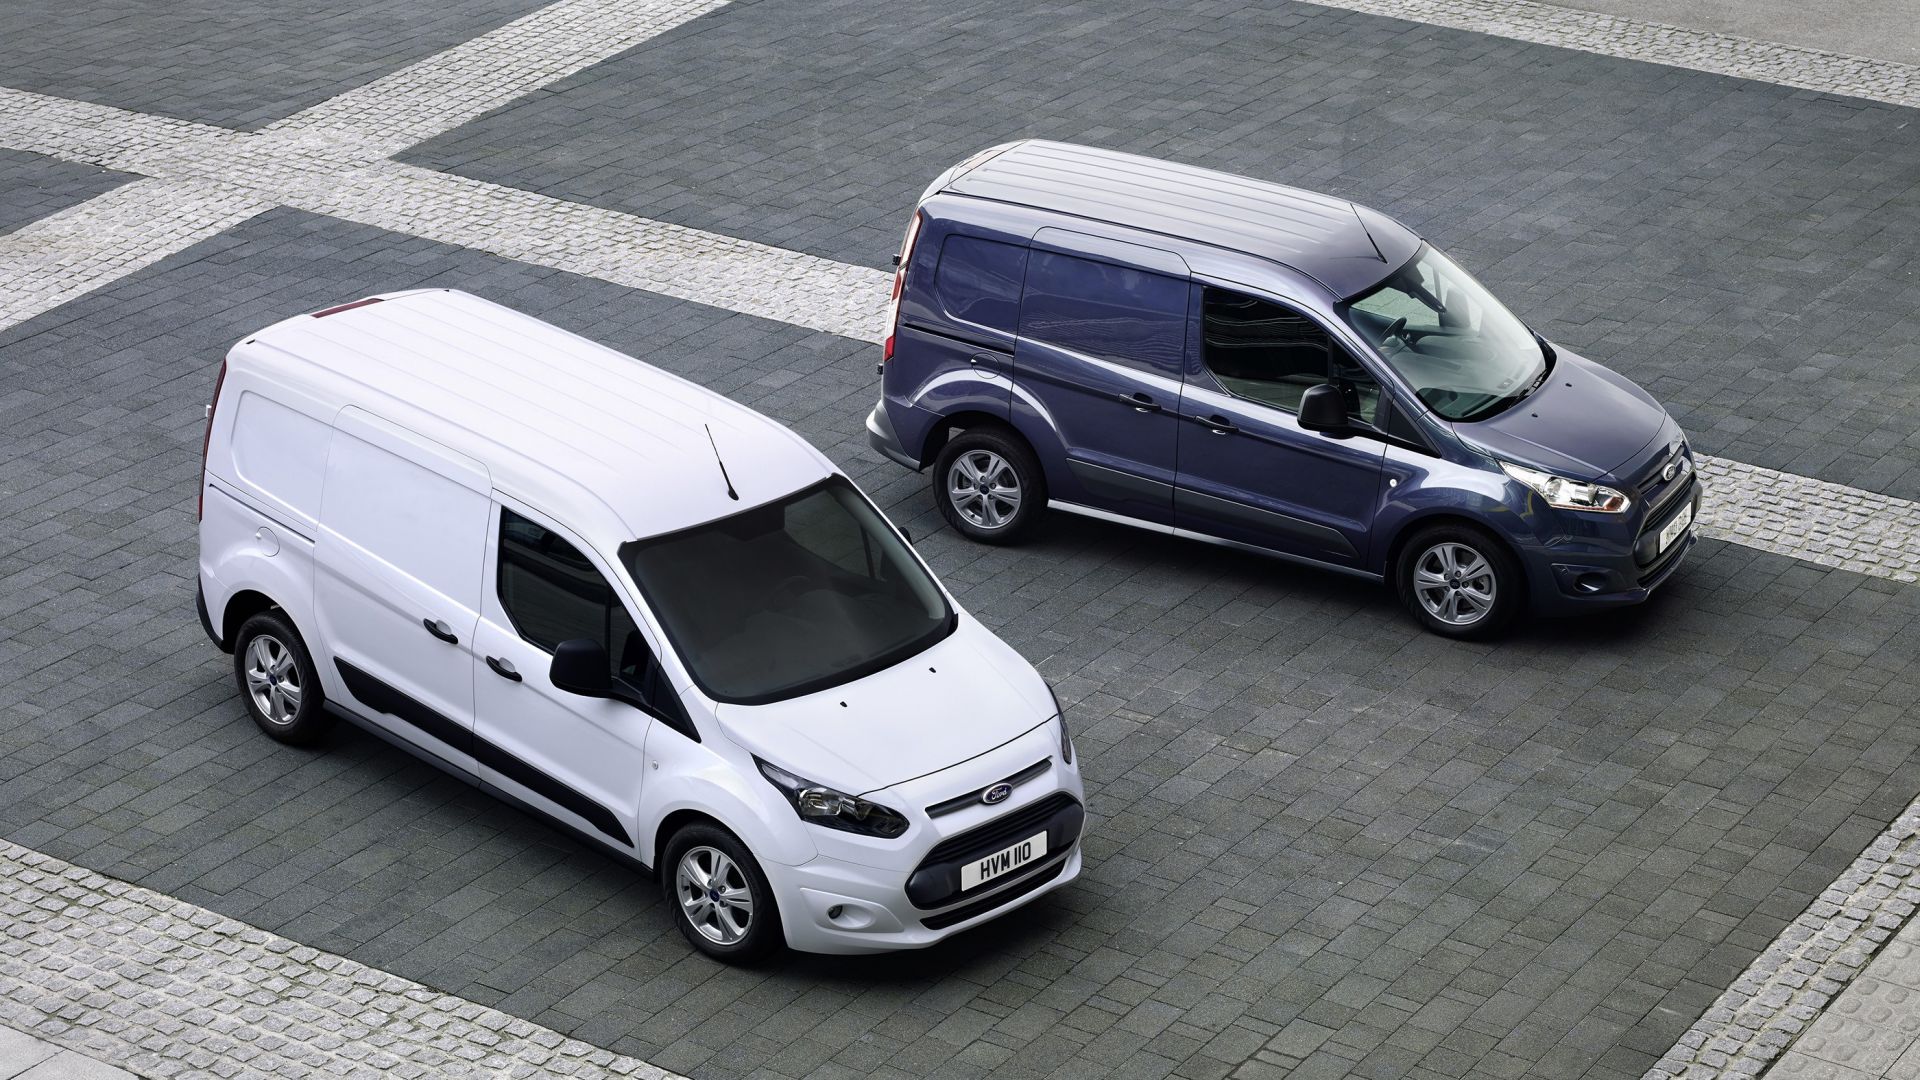 Форд транзит питание. Ford Transit connect 2022. Ford Transit 2014. Ford connect 2022. Ford Tourneo connect 2022 года.